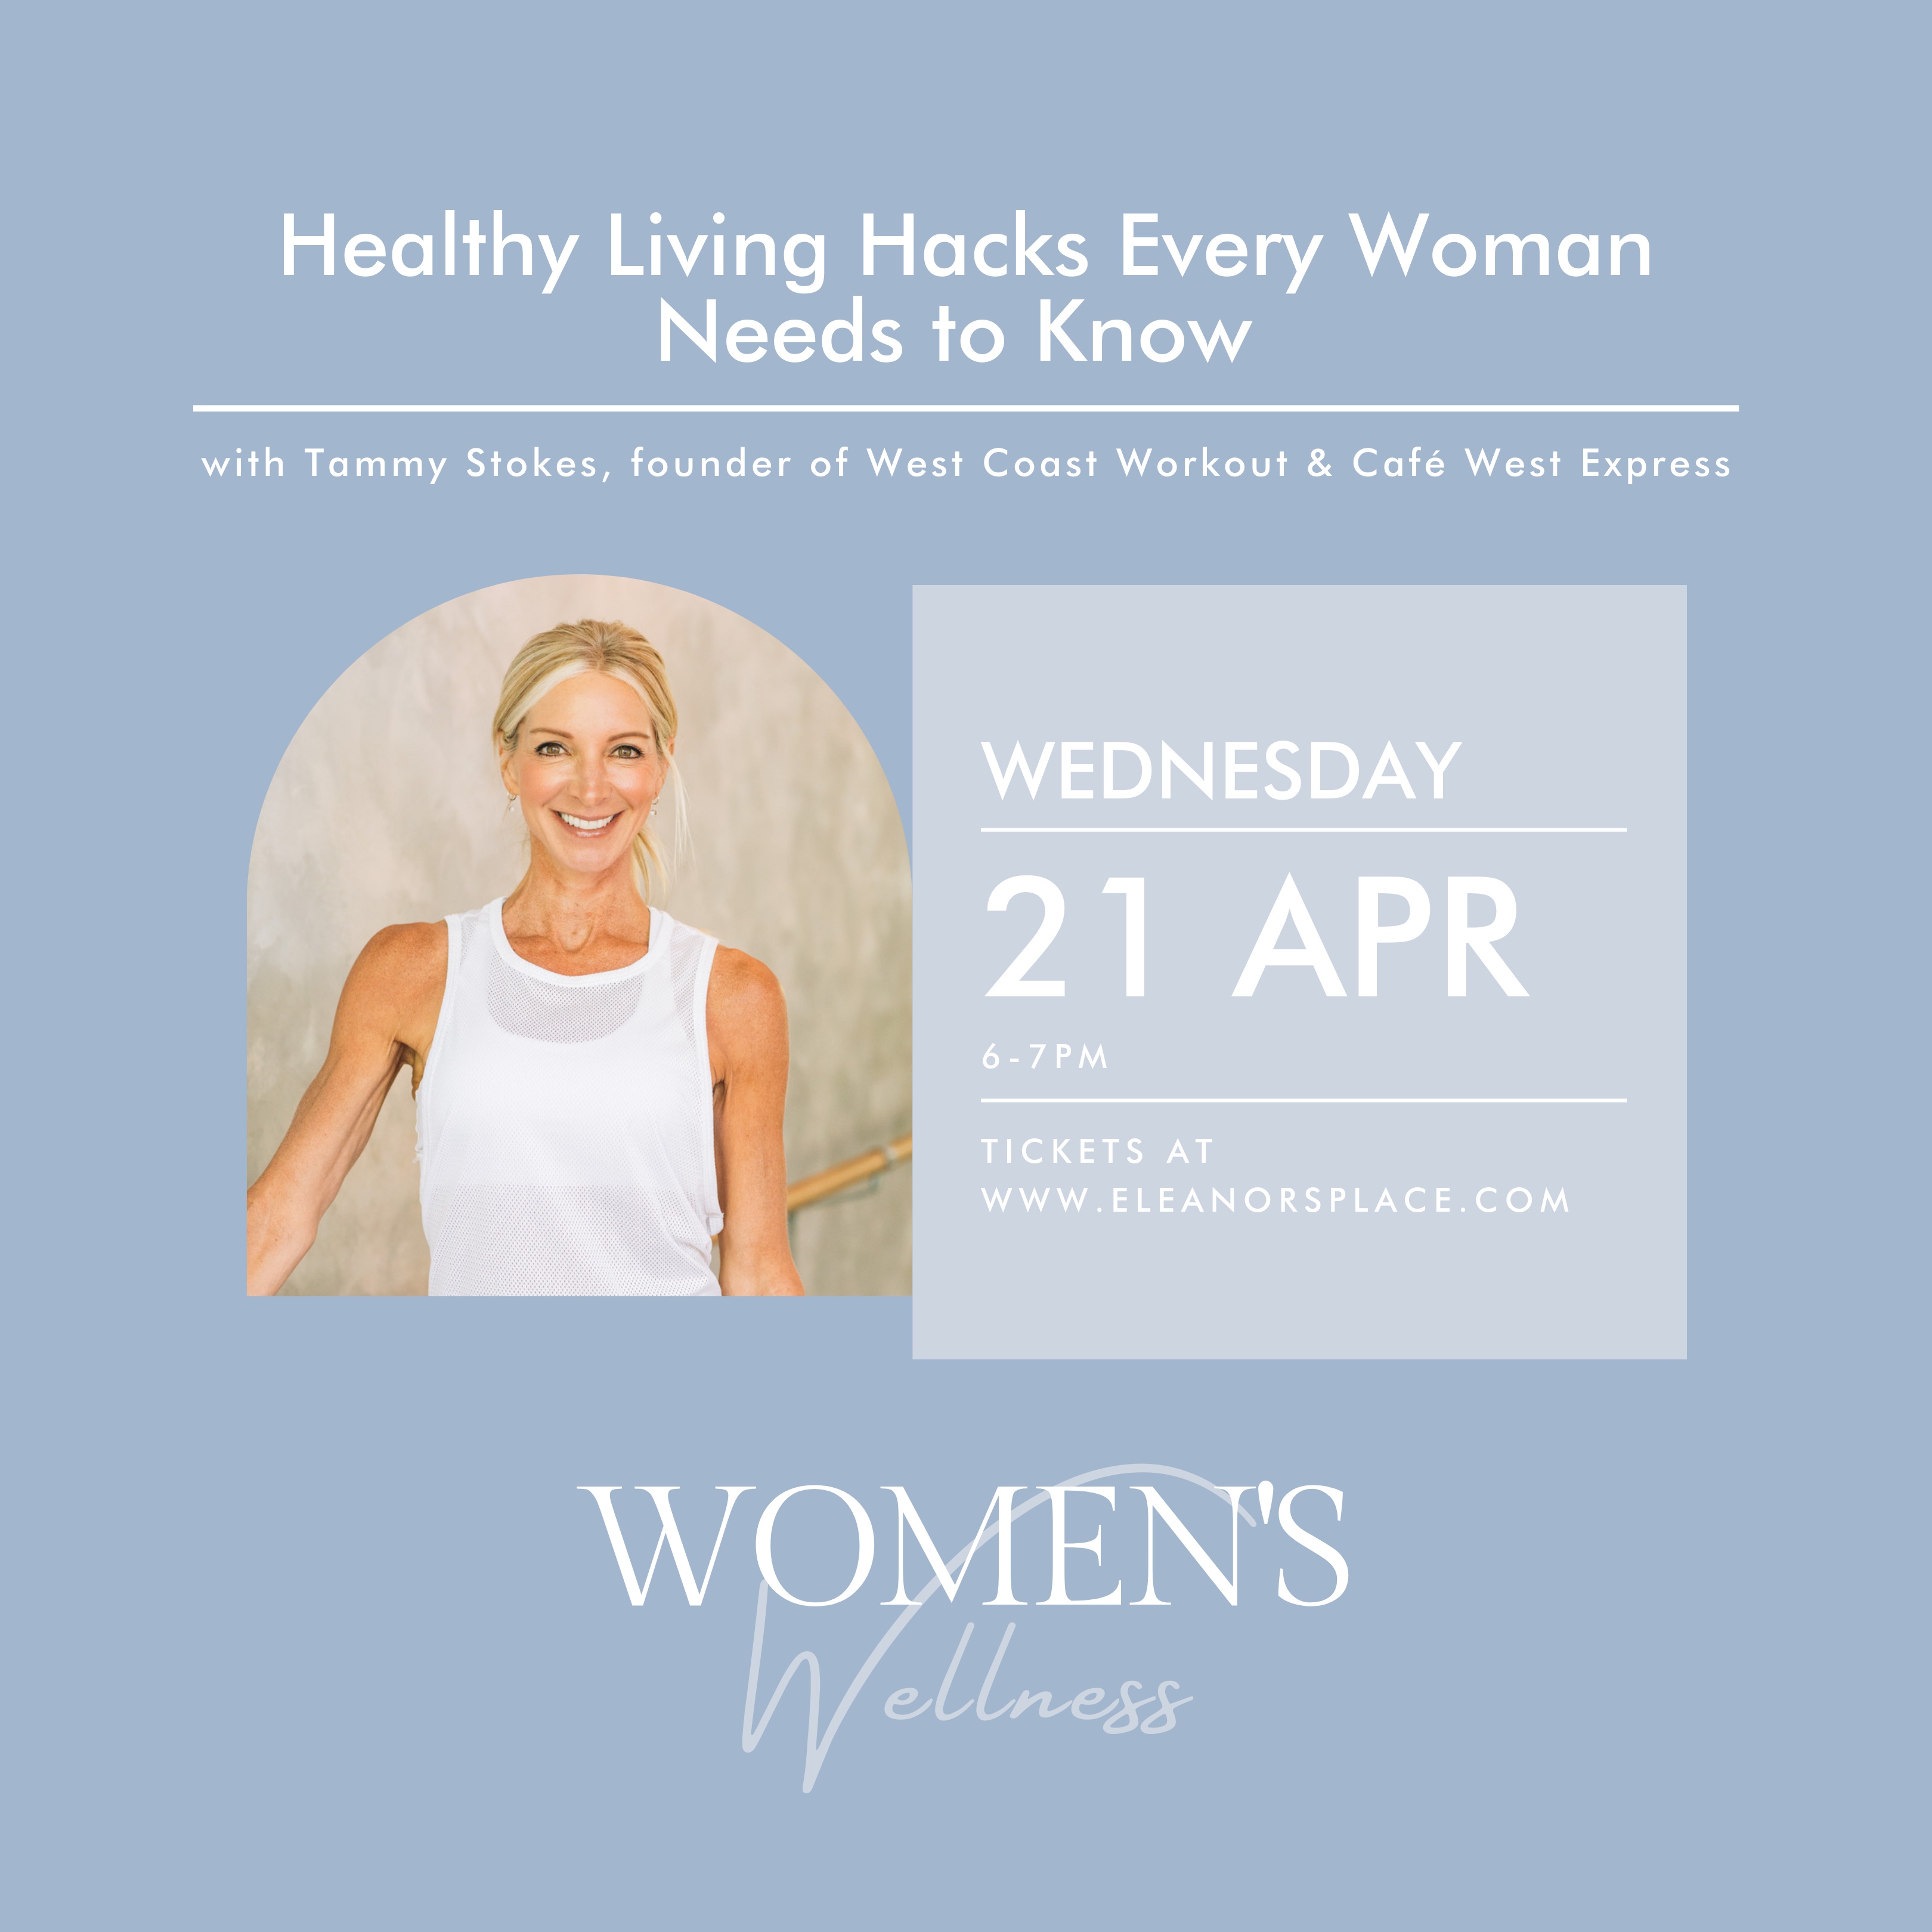 Healthy Living Hacks Every Woman Needs to Know